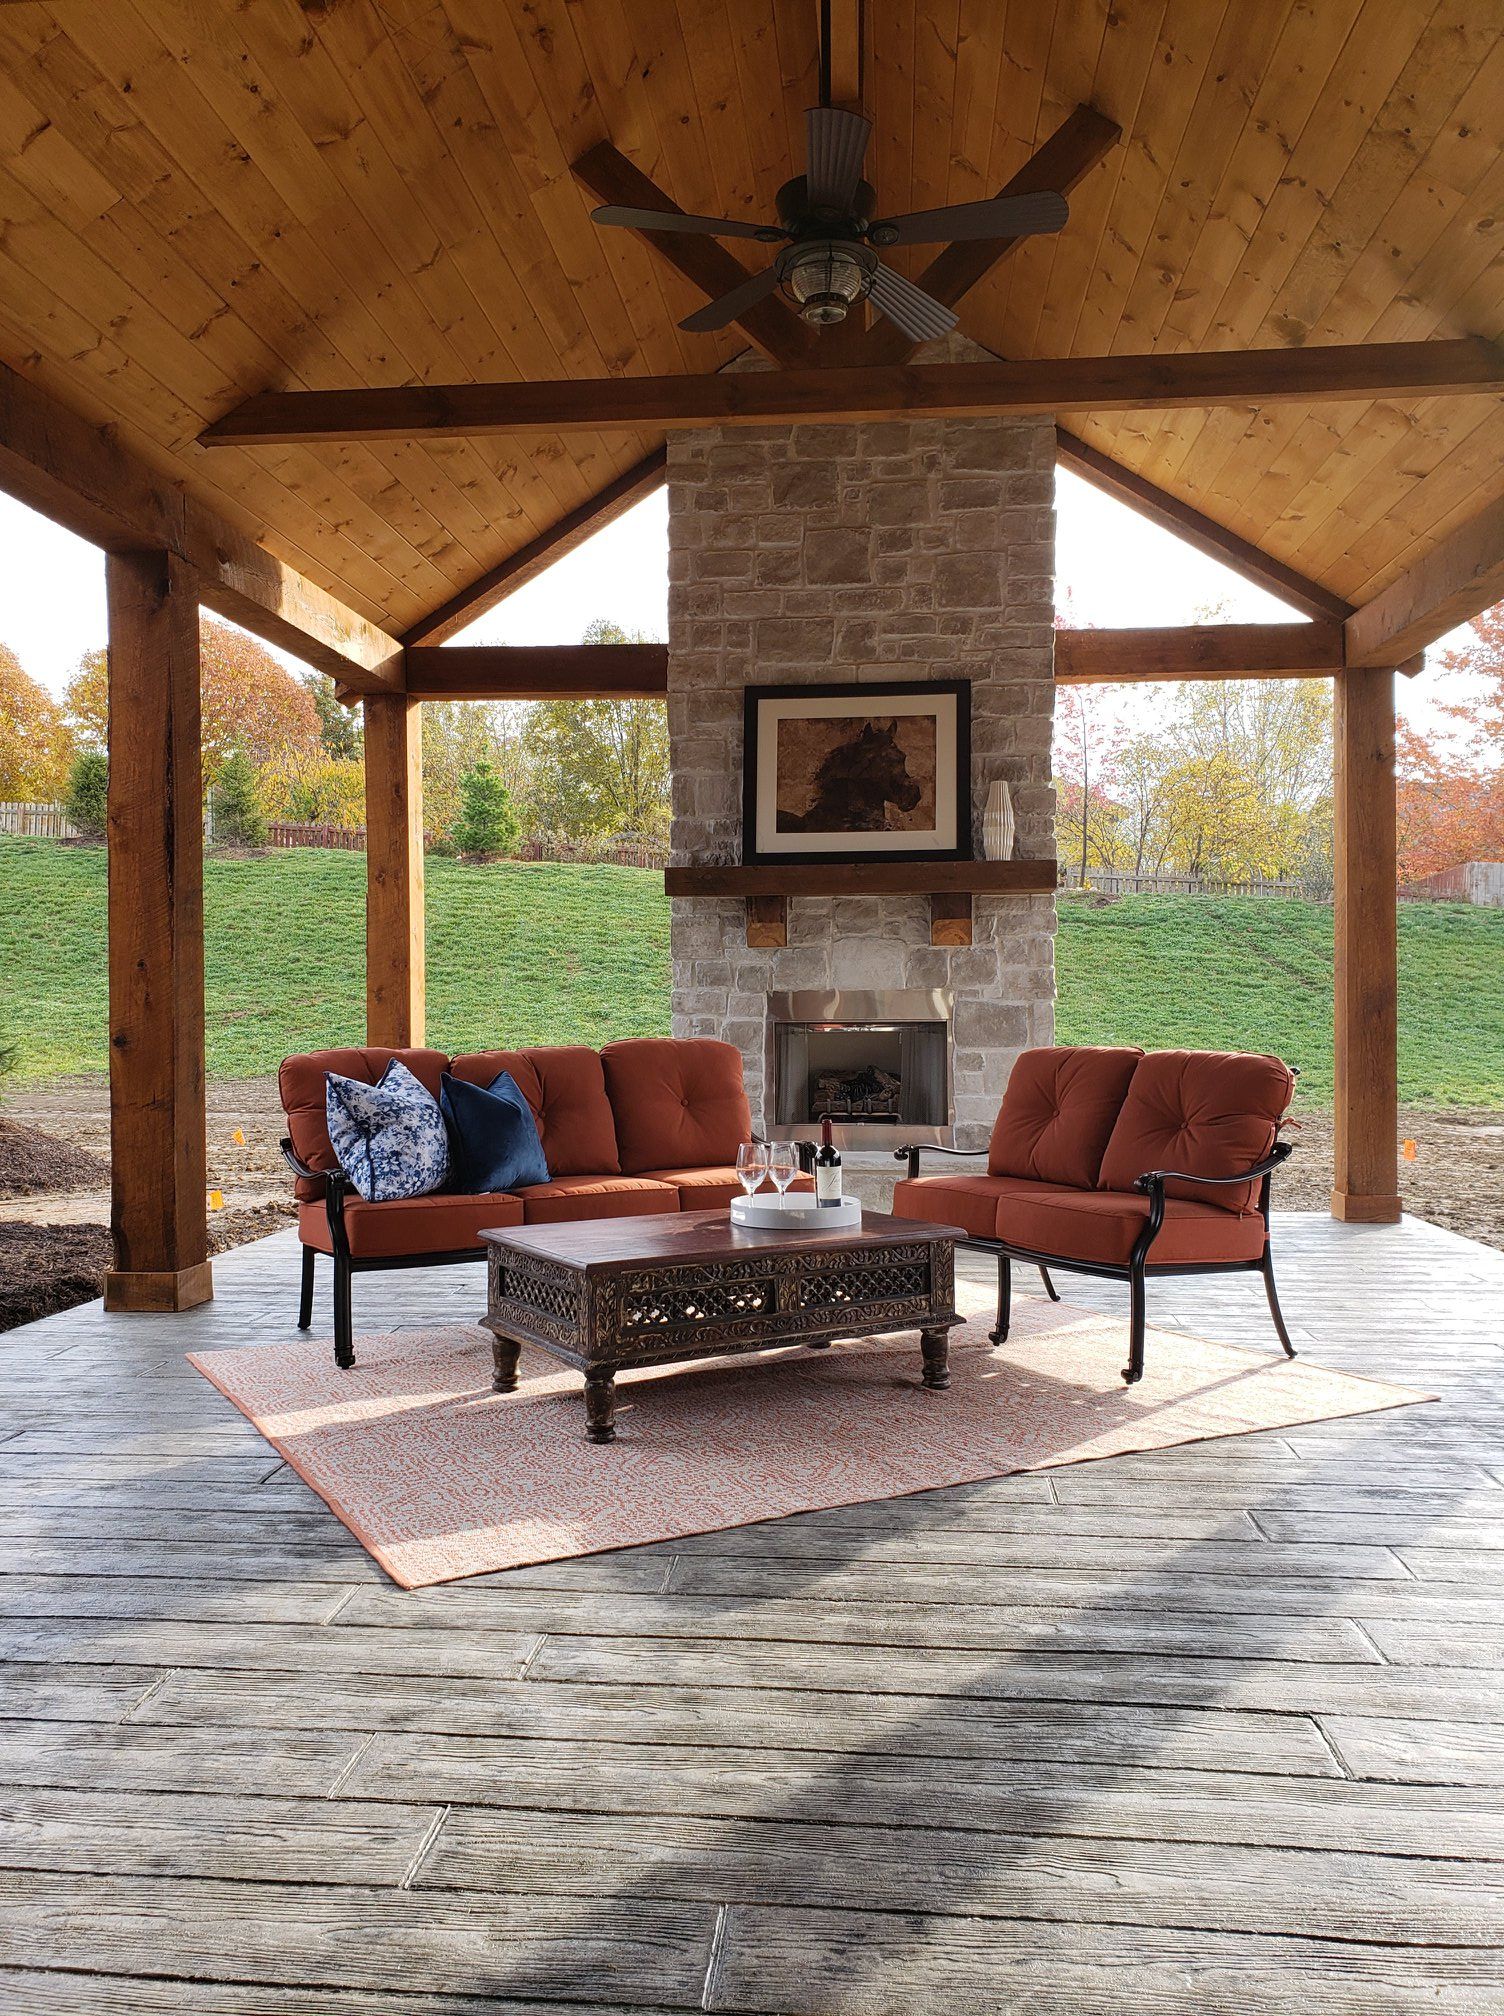 Timberwood Homes Outdoor Patio with Fireplace